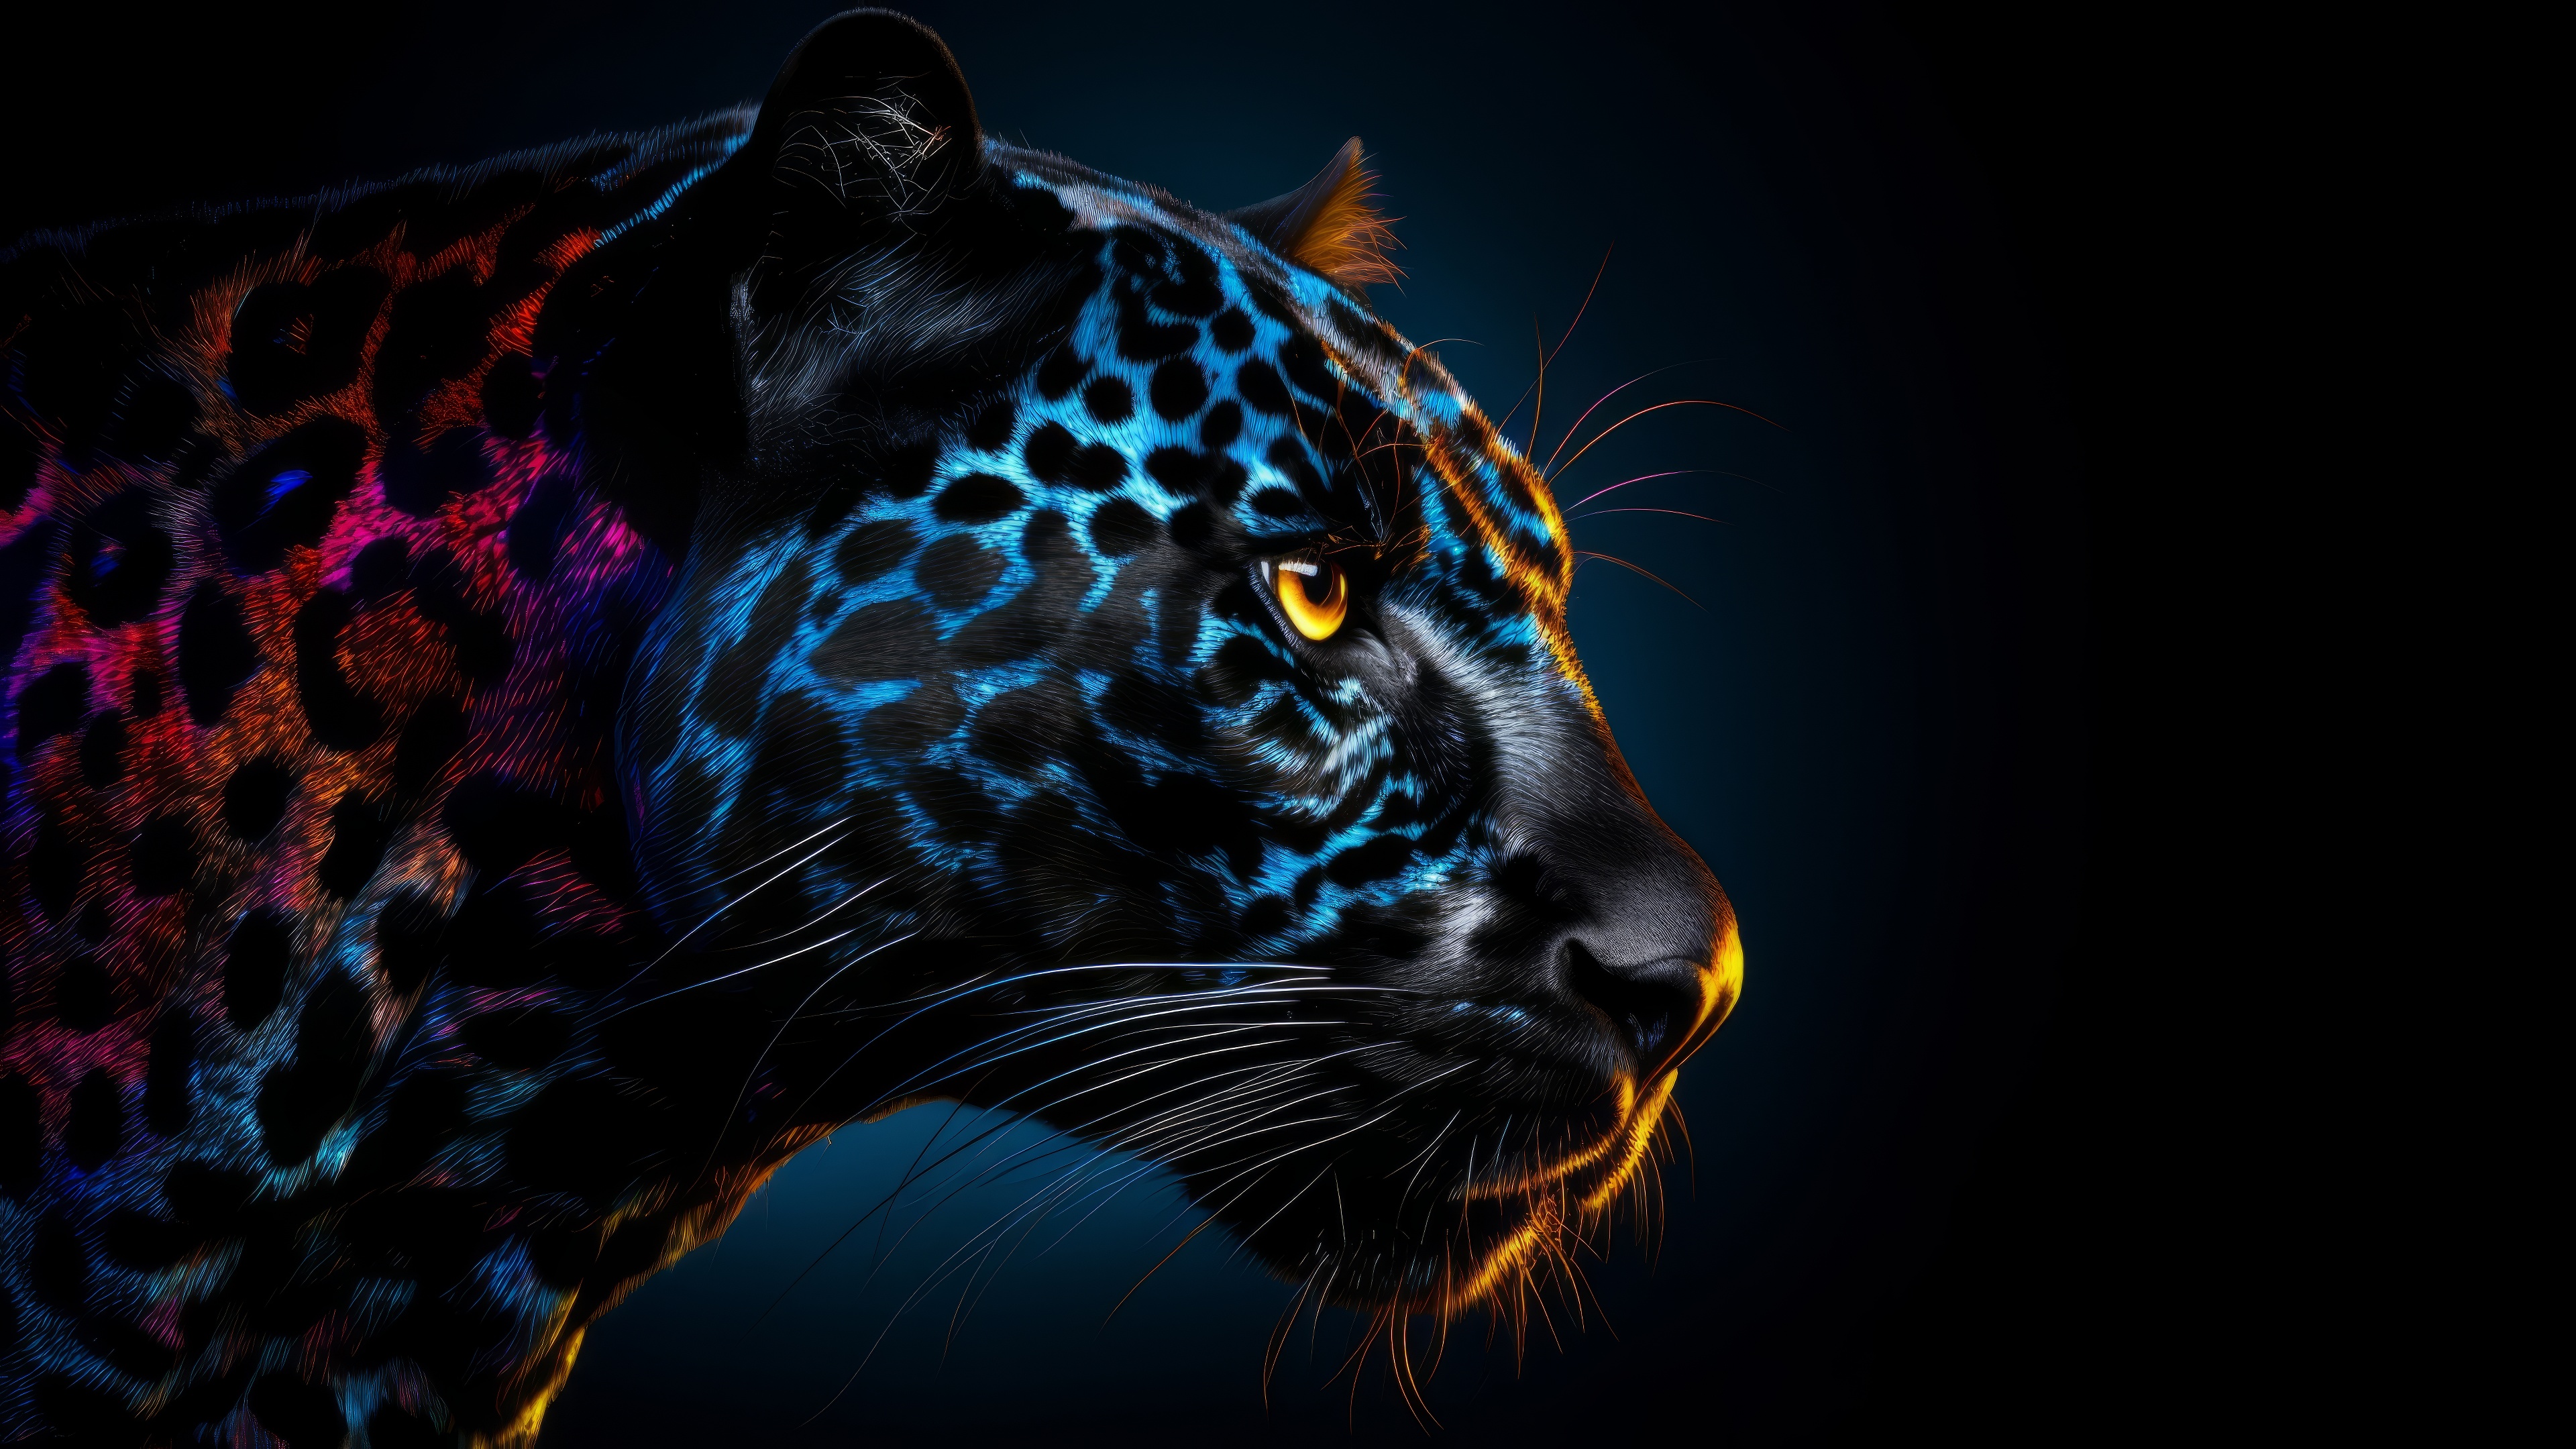 Free photo Black panther with rainbow pattern